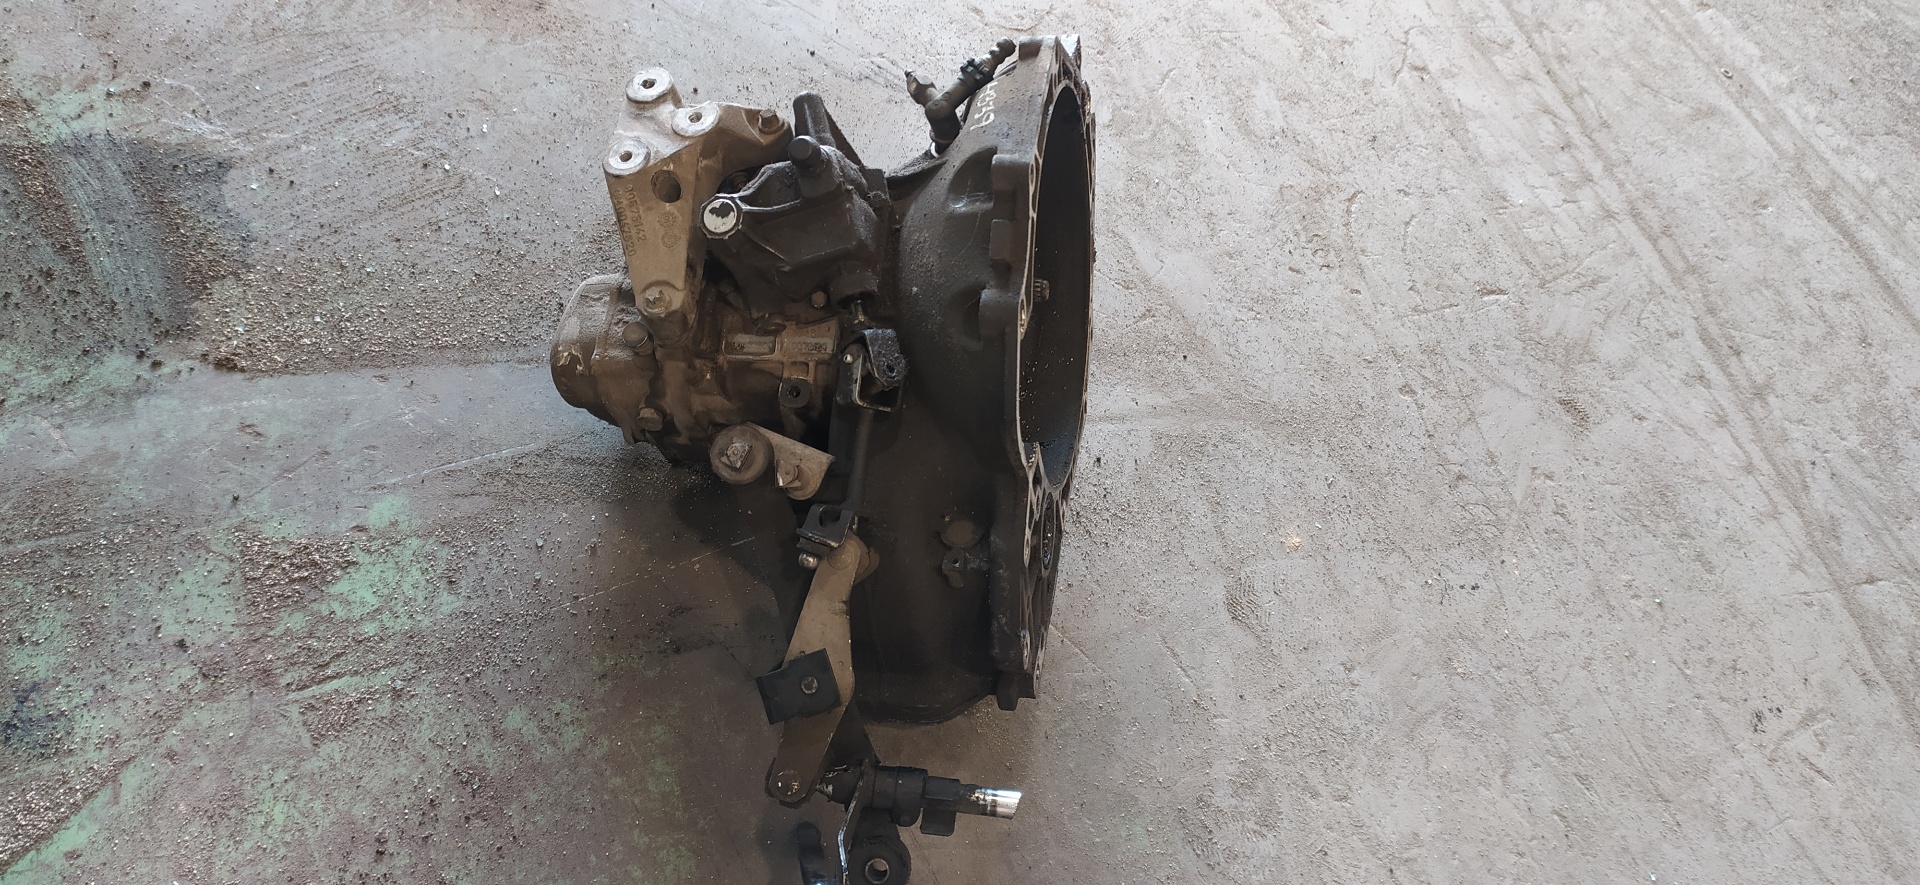 OPEL Astra H (2004-2014) Gearbox 90400209, 0076124, M79 23815350